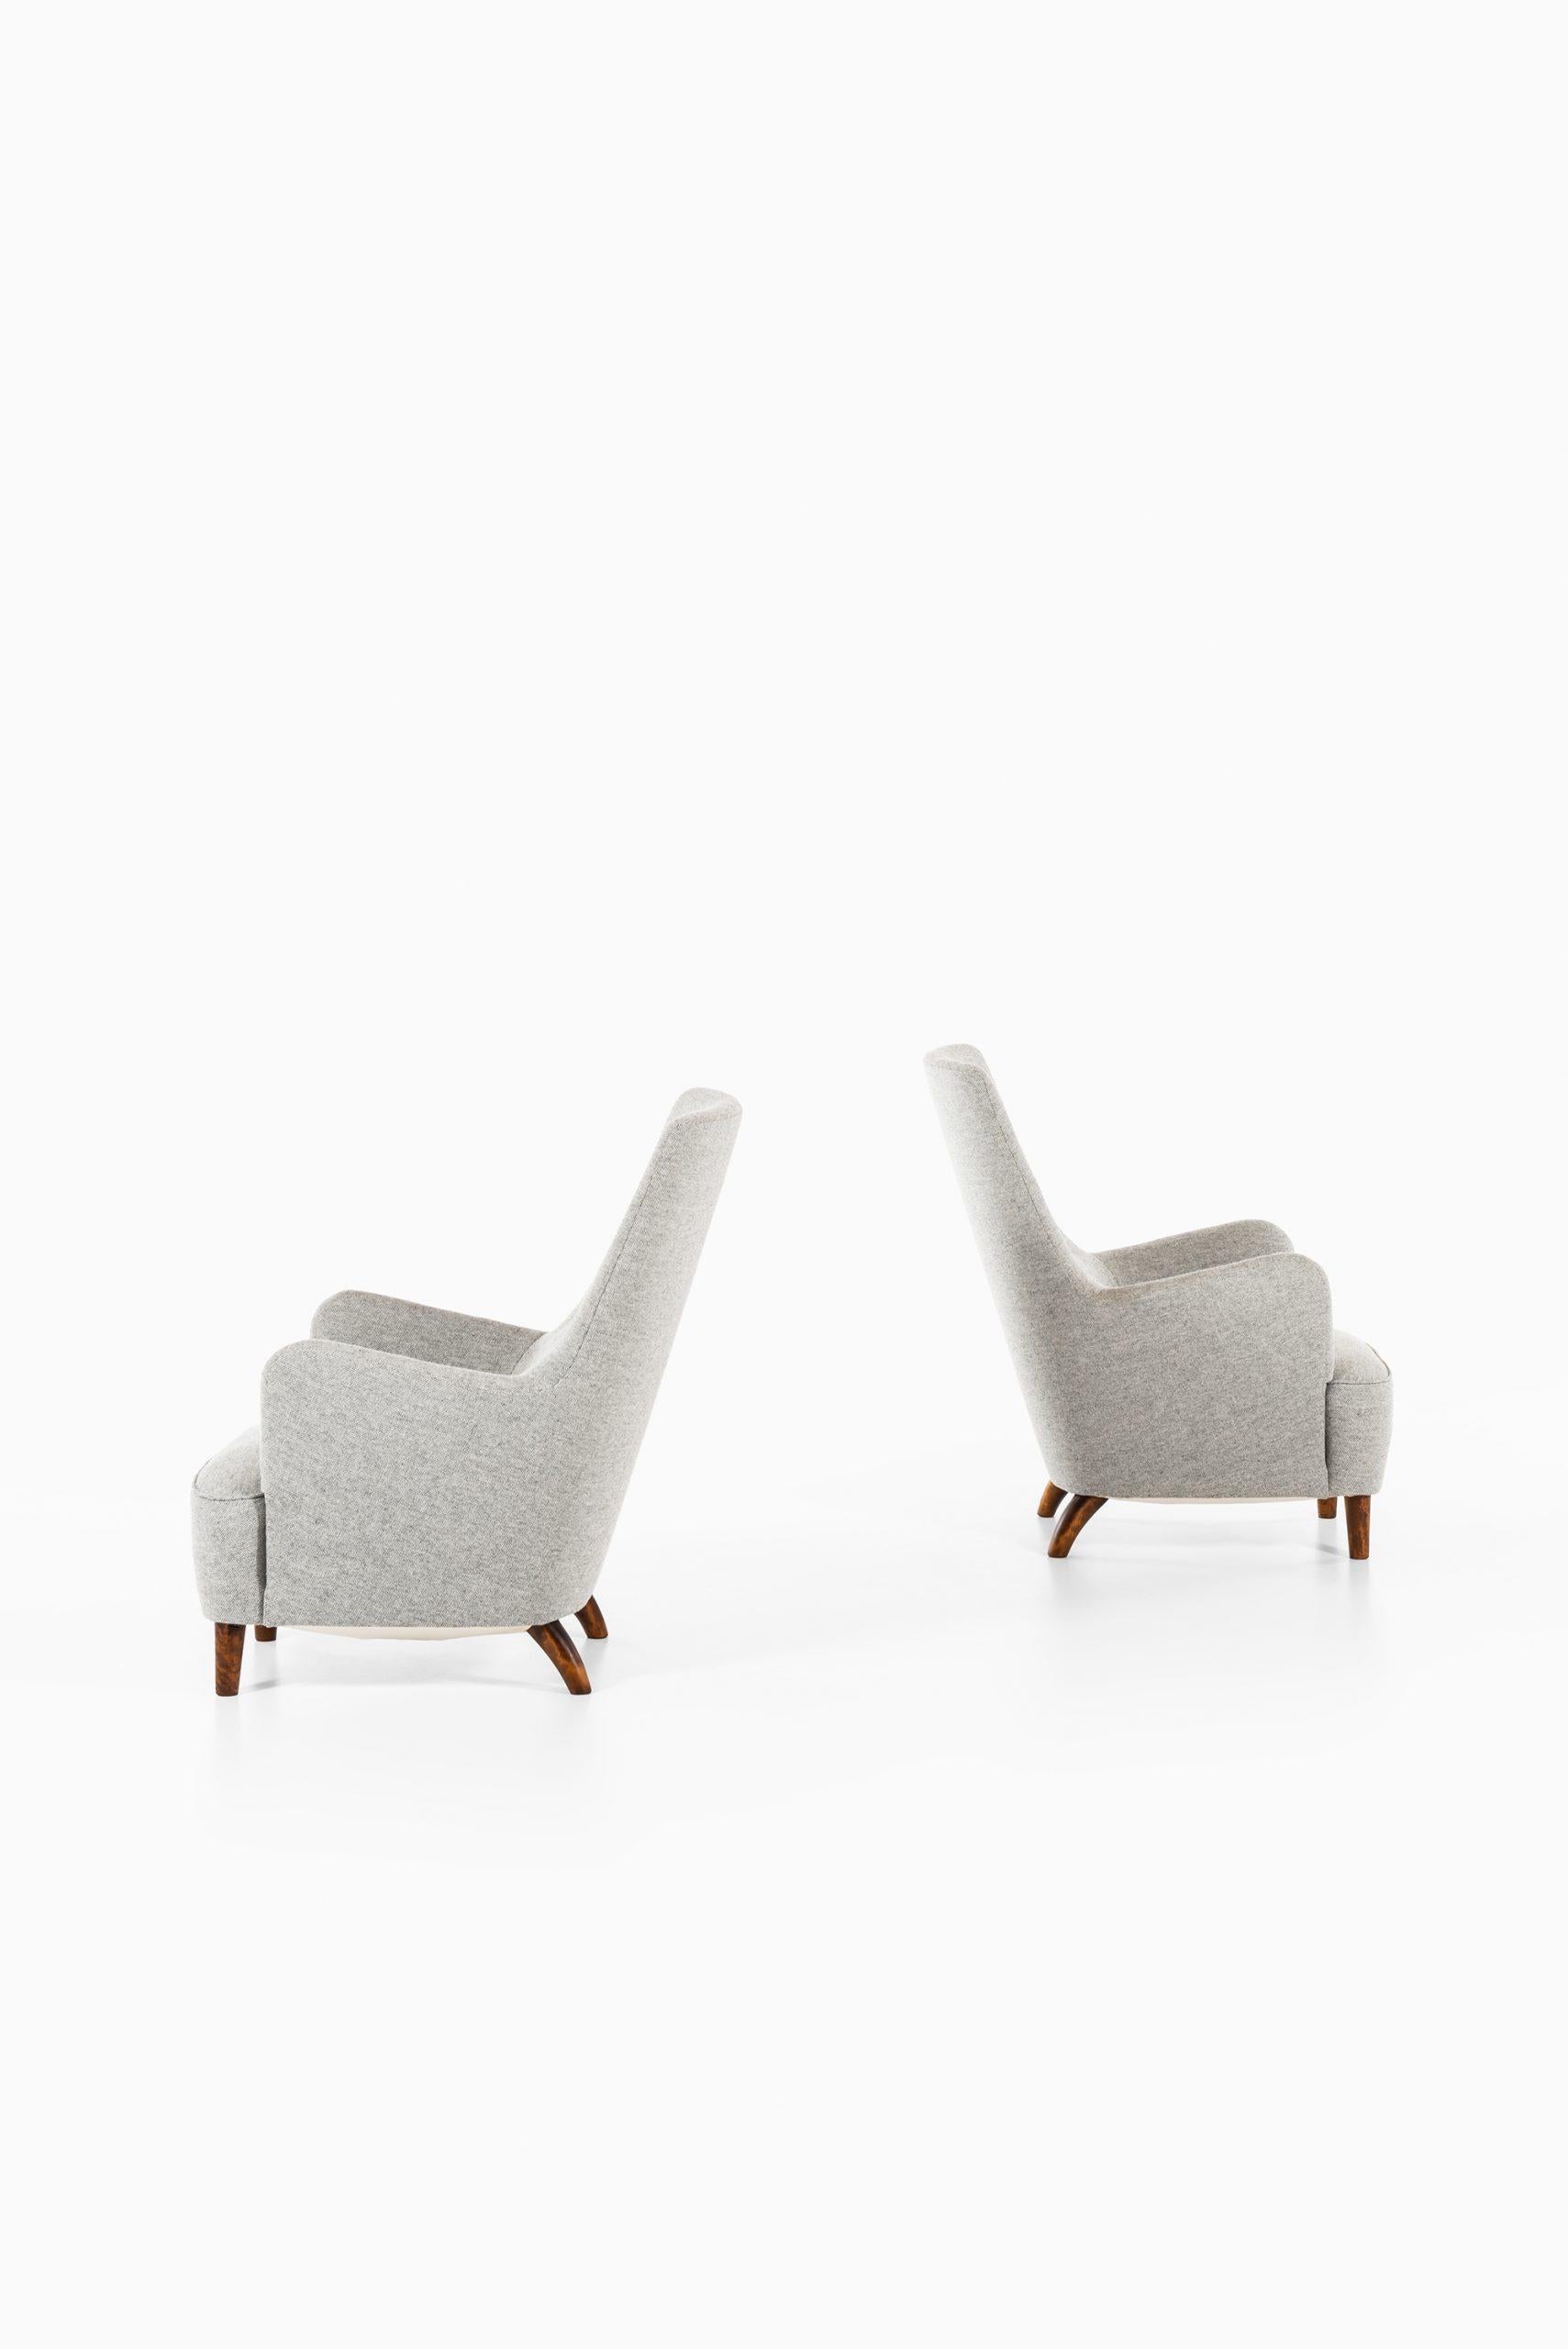 Mid-20th Century Carl-Axel Acking Easy Chairs Produced in Sweden For Sale